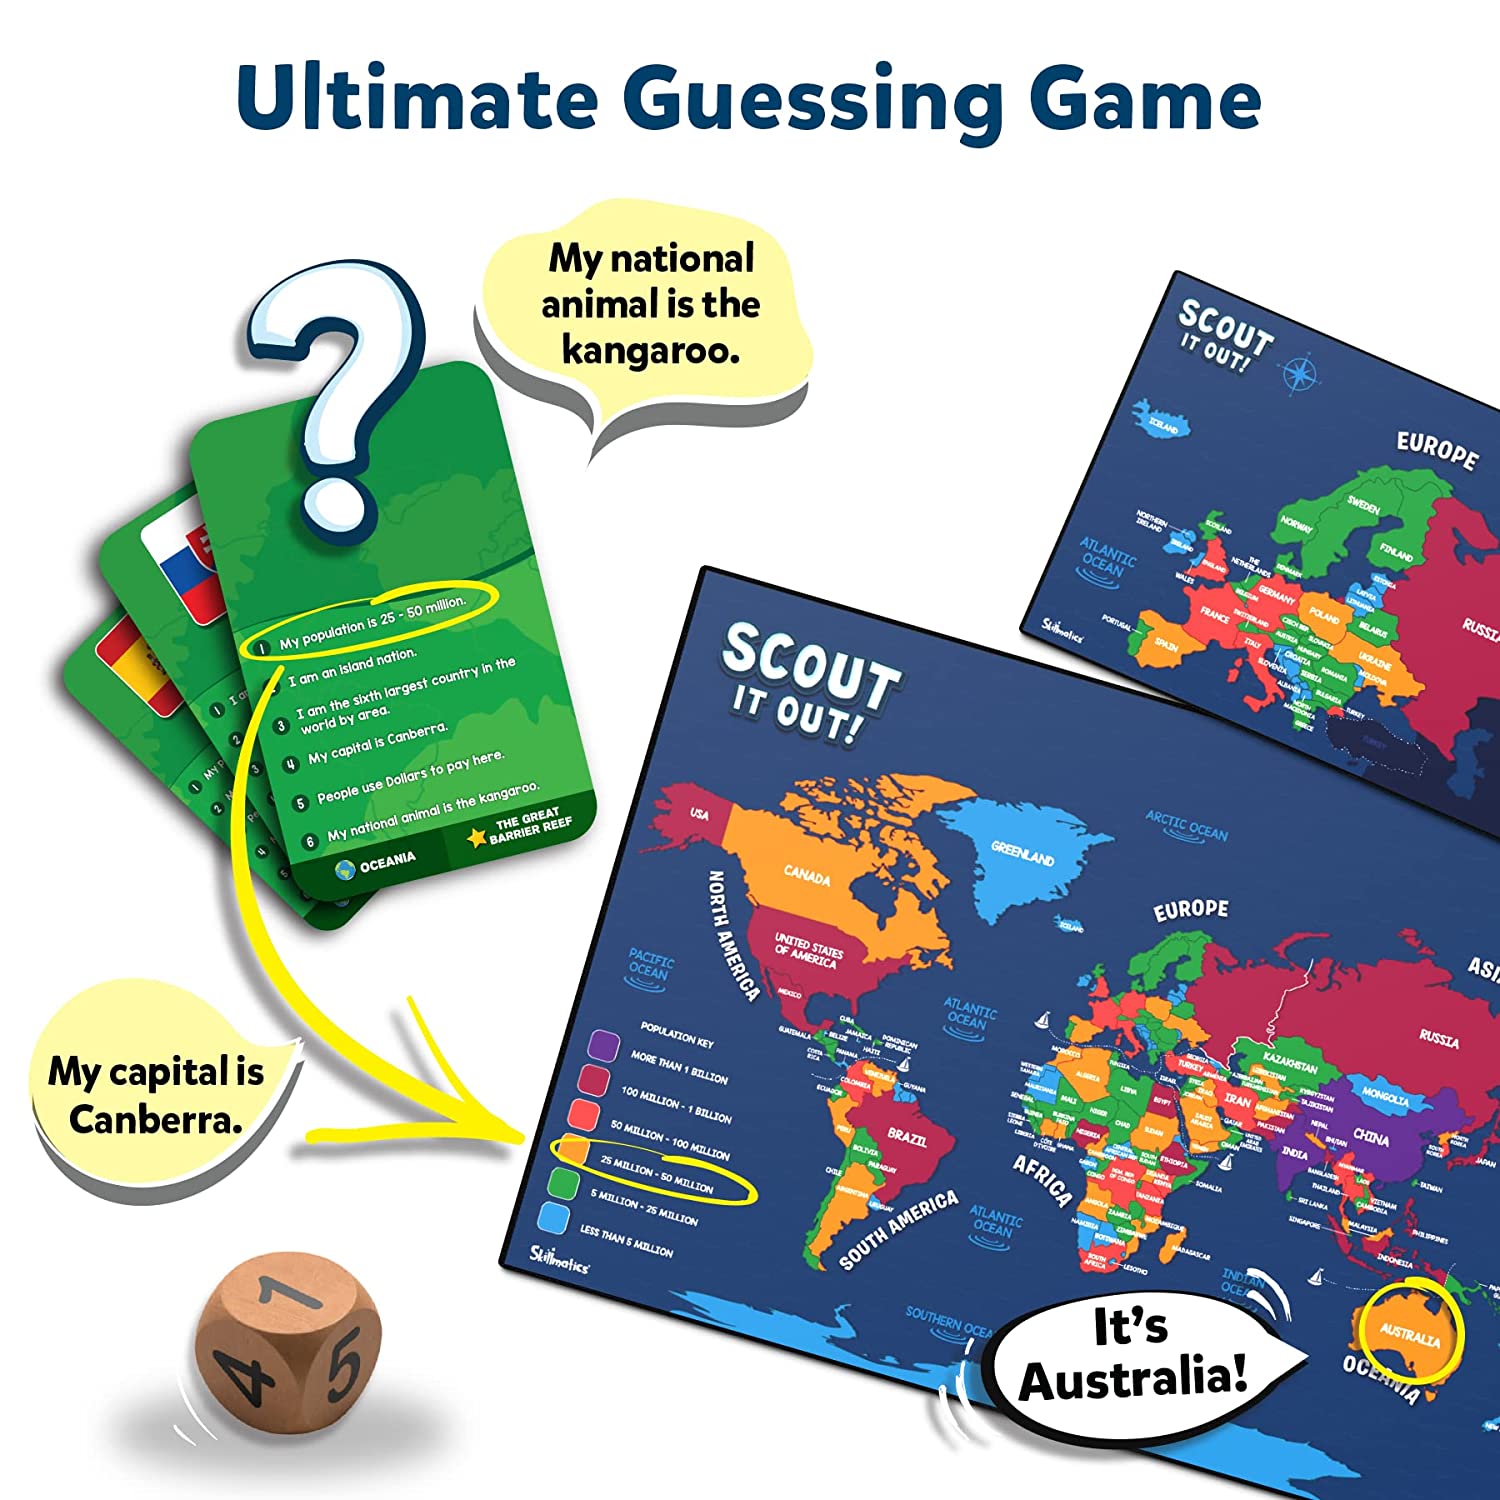 Skillmatics Scout It Out! Countries of The World - Fun Guessing & Trivia Board Game for Families